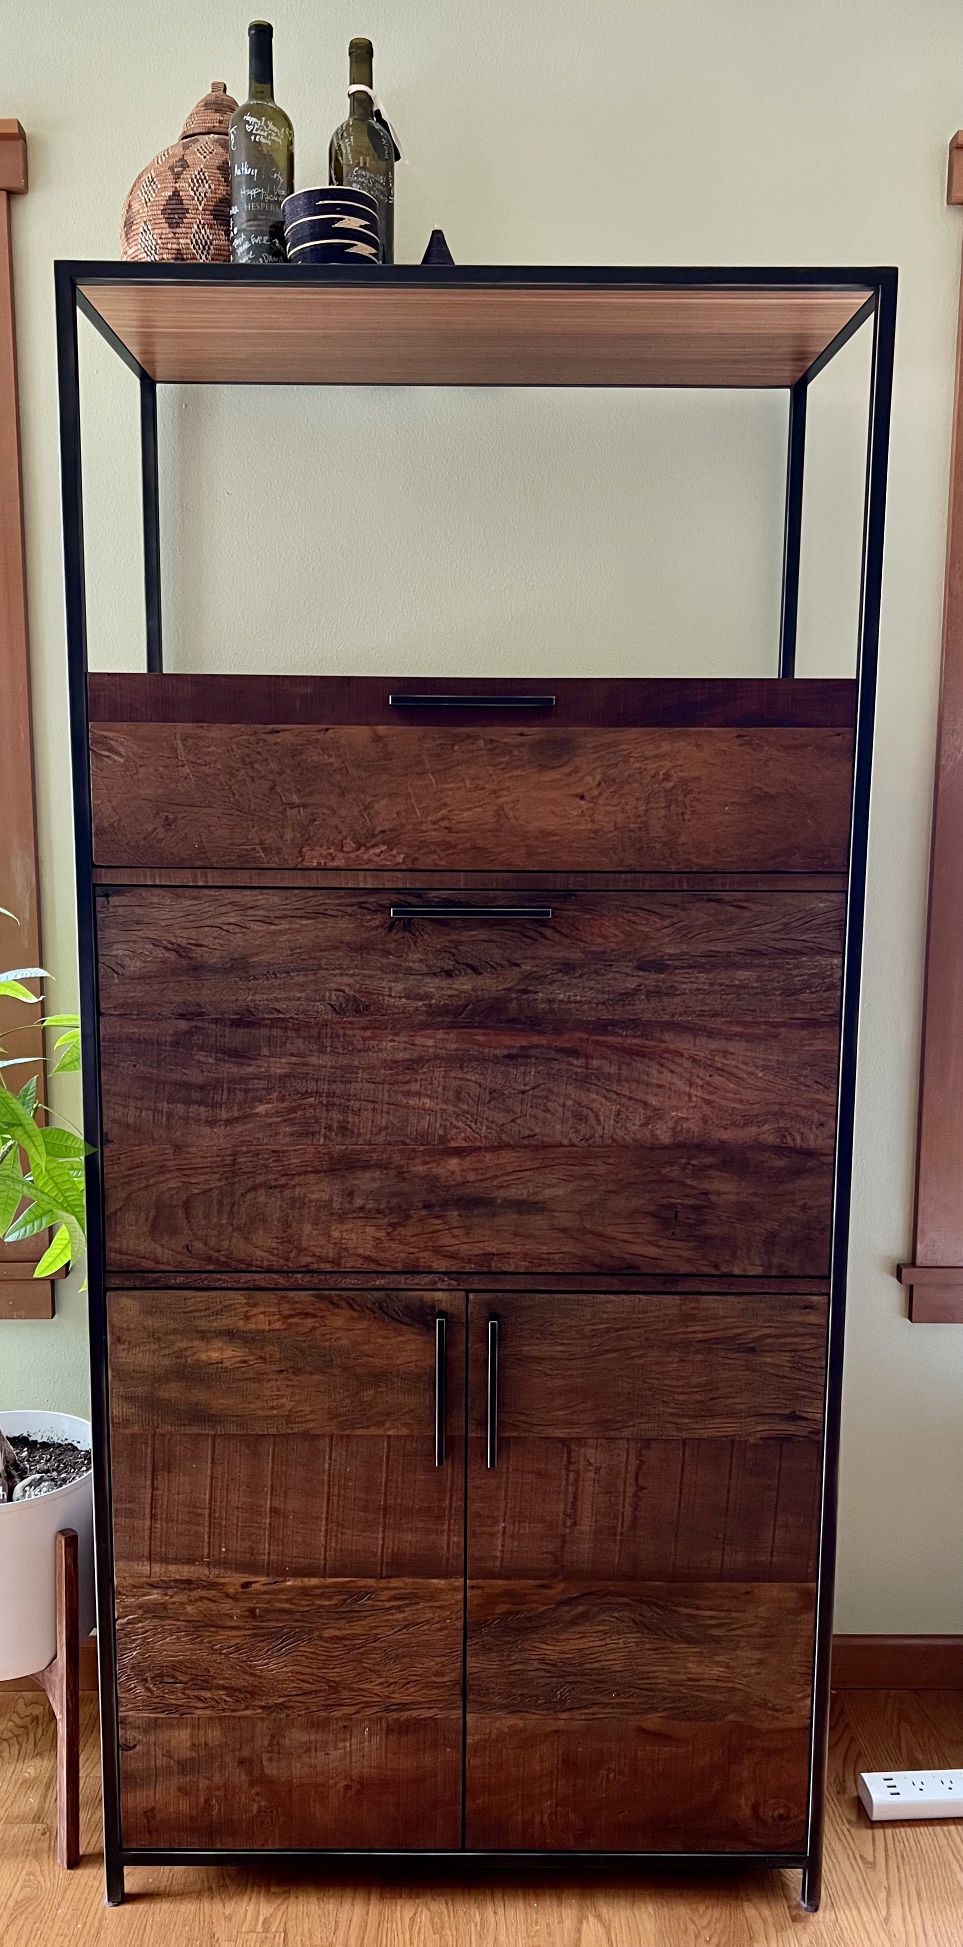 Modern Wooden Liquor Cabinet (Recycled Wood).